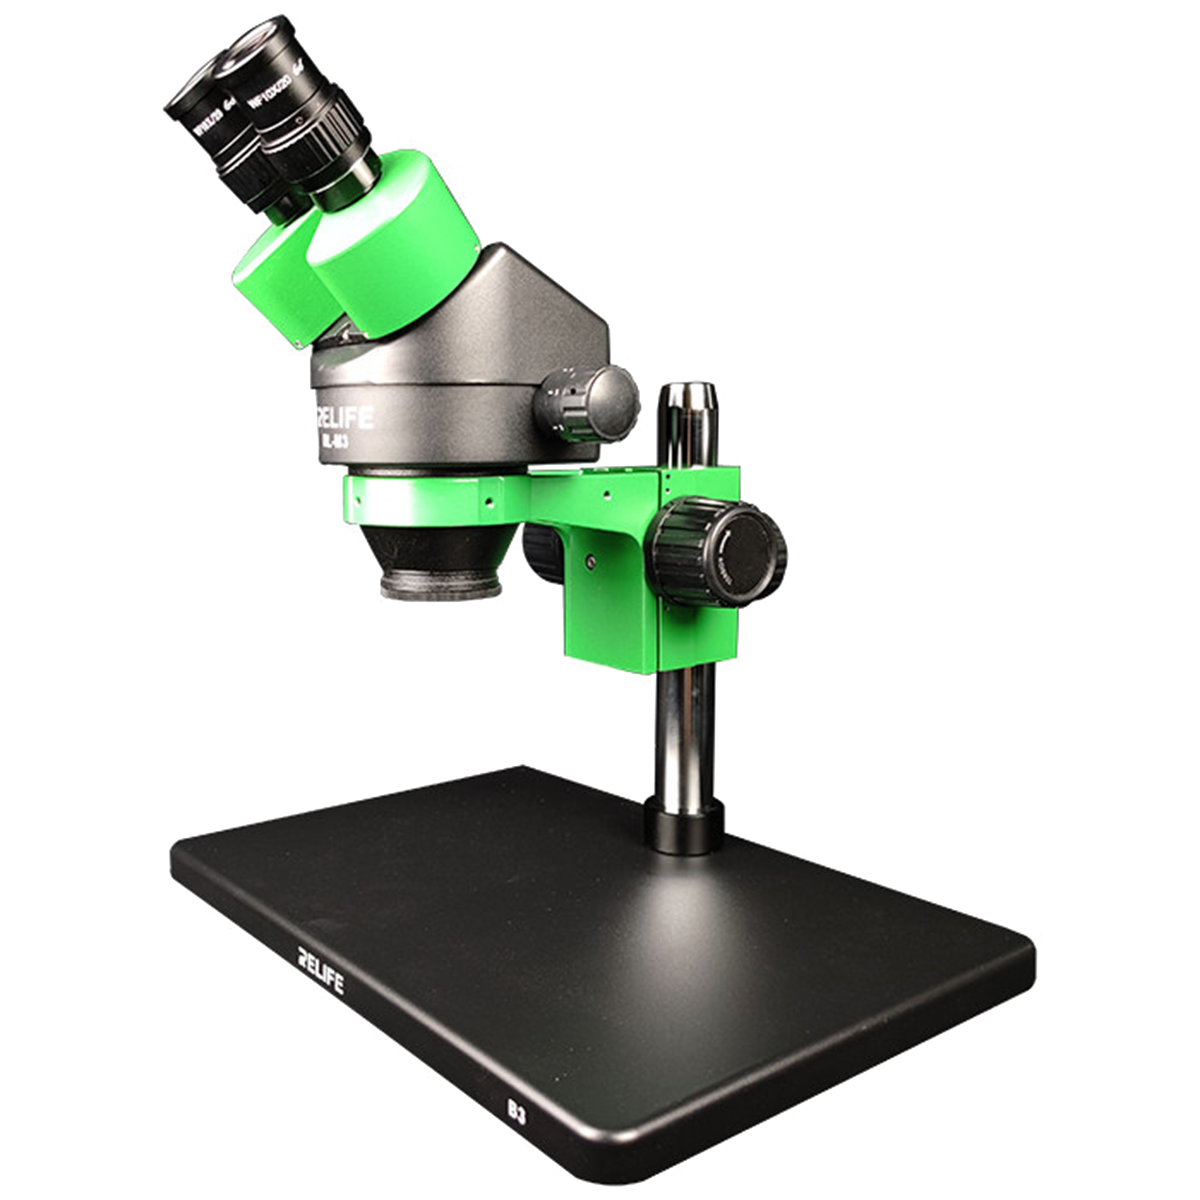 RELIFE M3T B3 MICROSCOPE WITH BIG BASE WITH LIGHT&0.5X LENSE